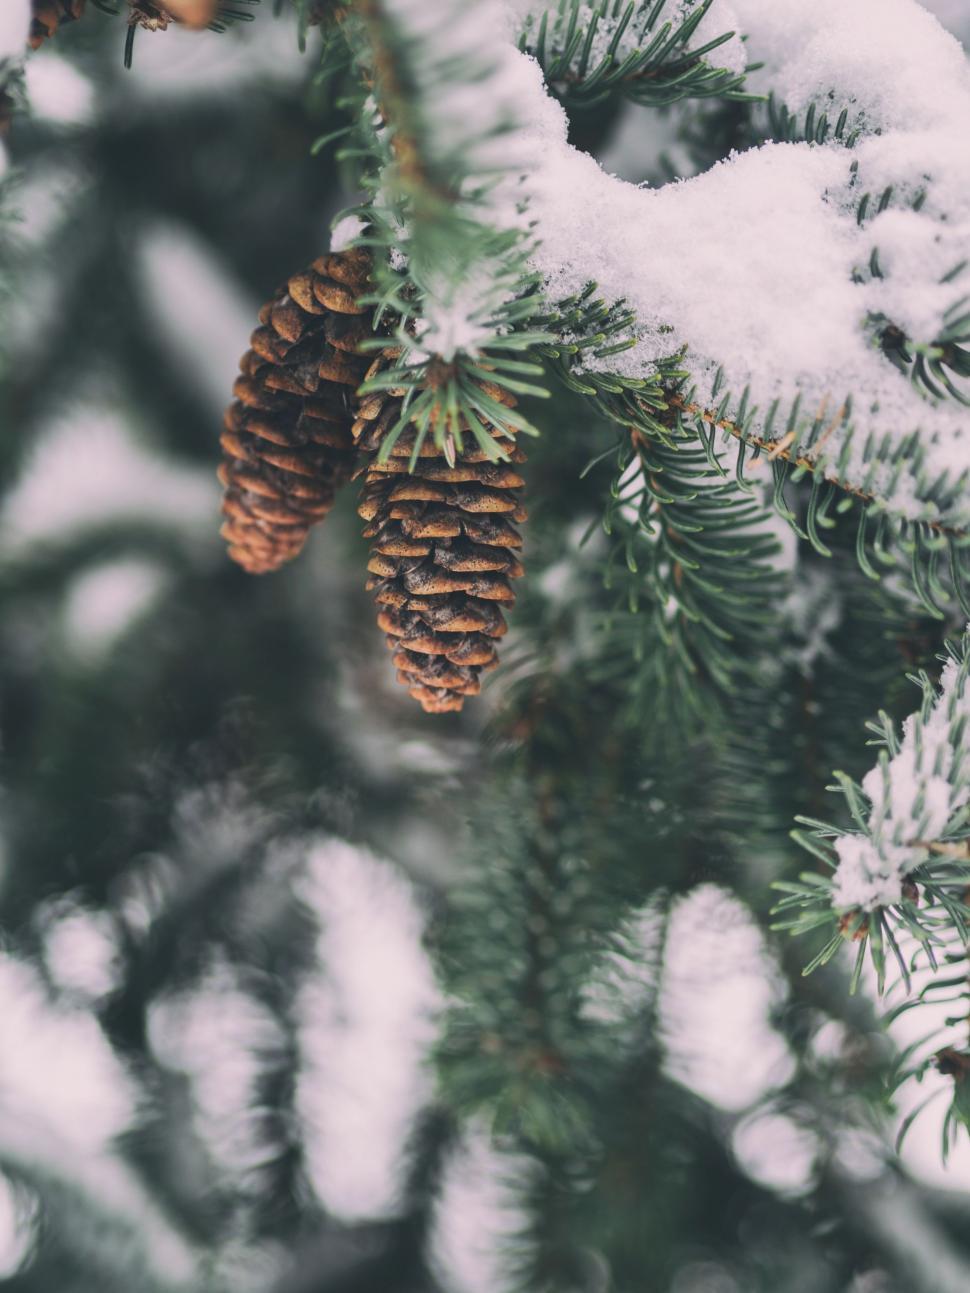 Free Image of Pine Cone Hanging From Snow-Covered Tree 